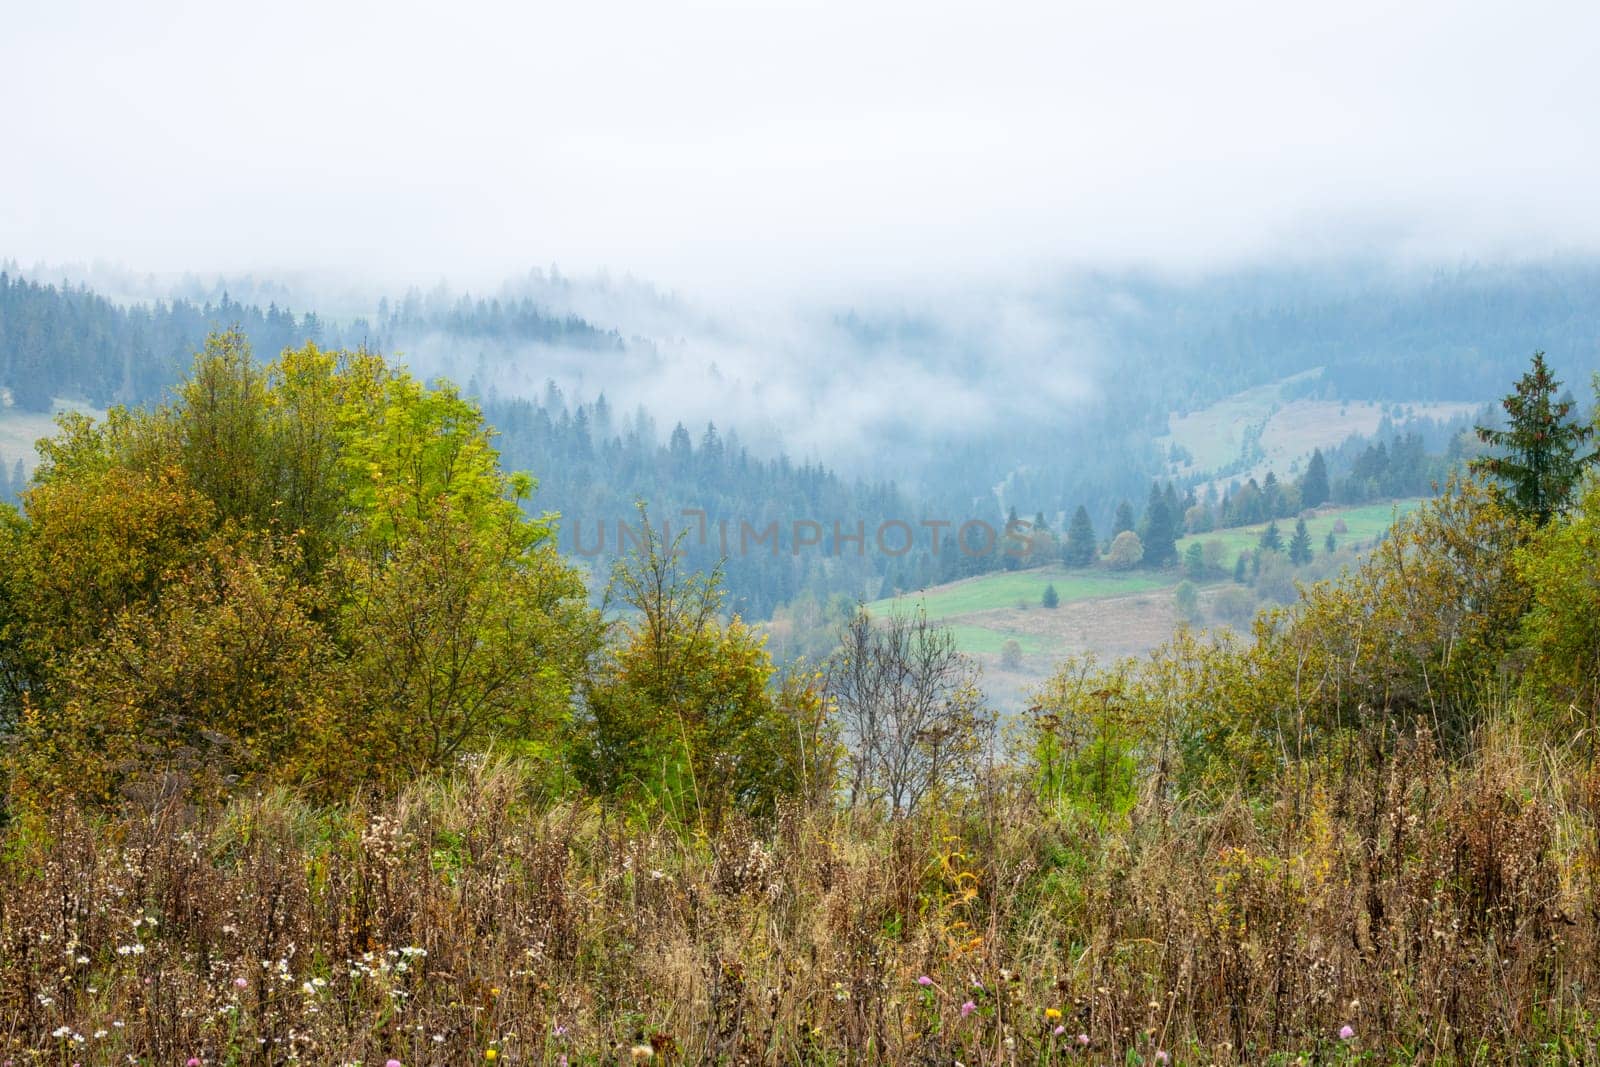 Very Thick Fog Hides the Mountains by Ruckzack